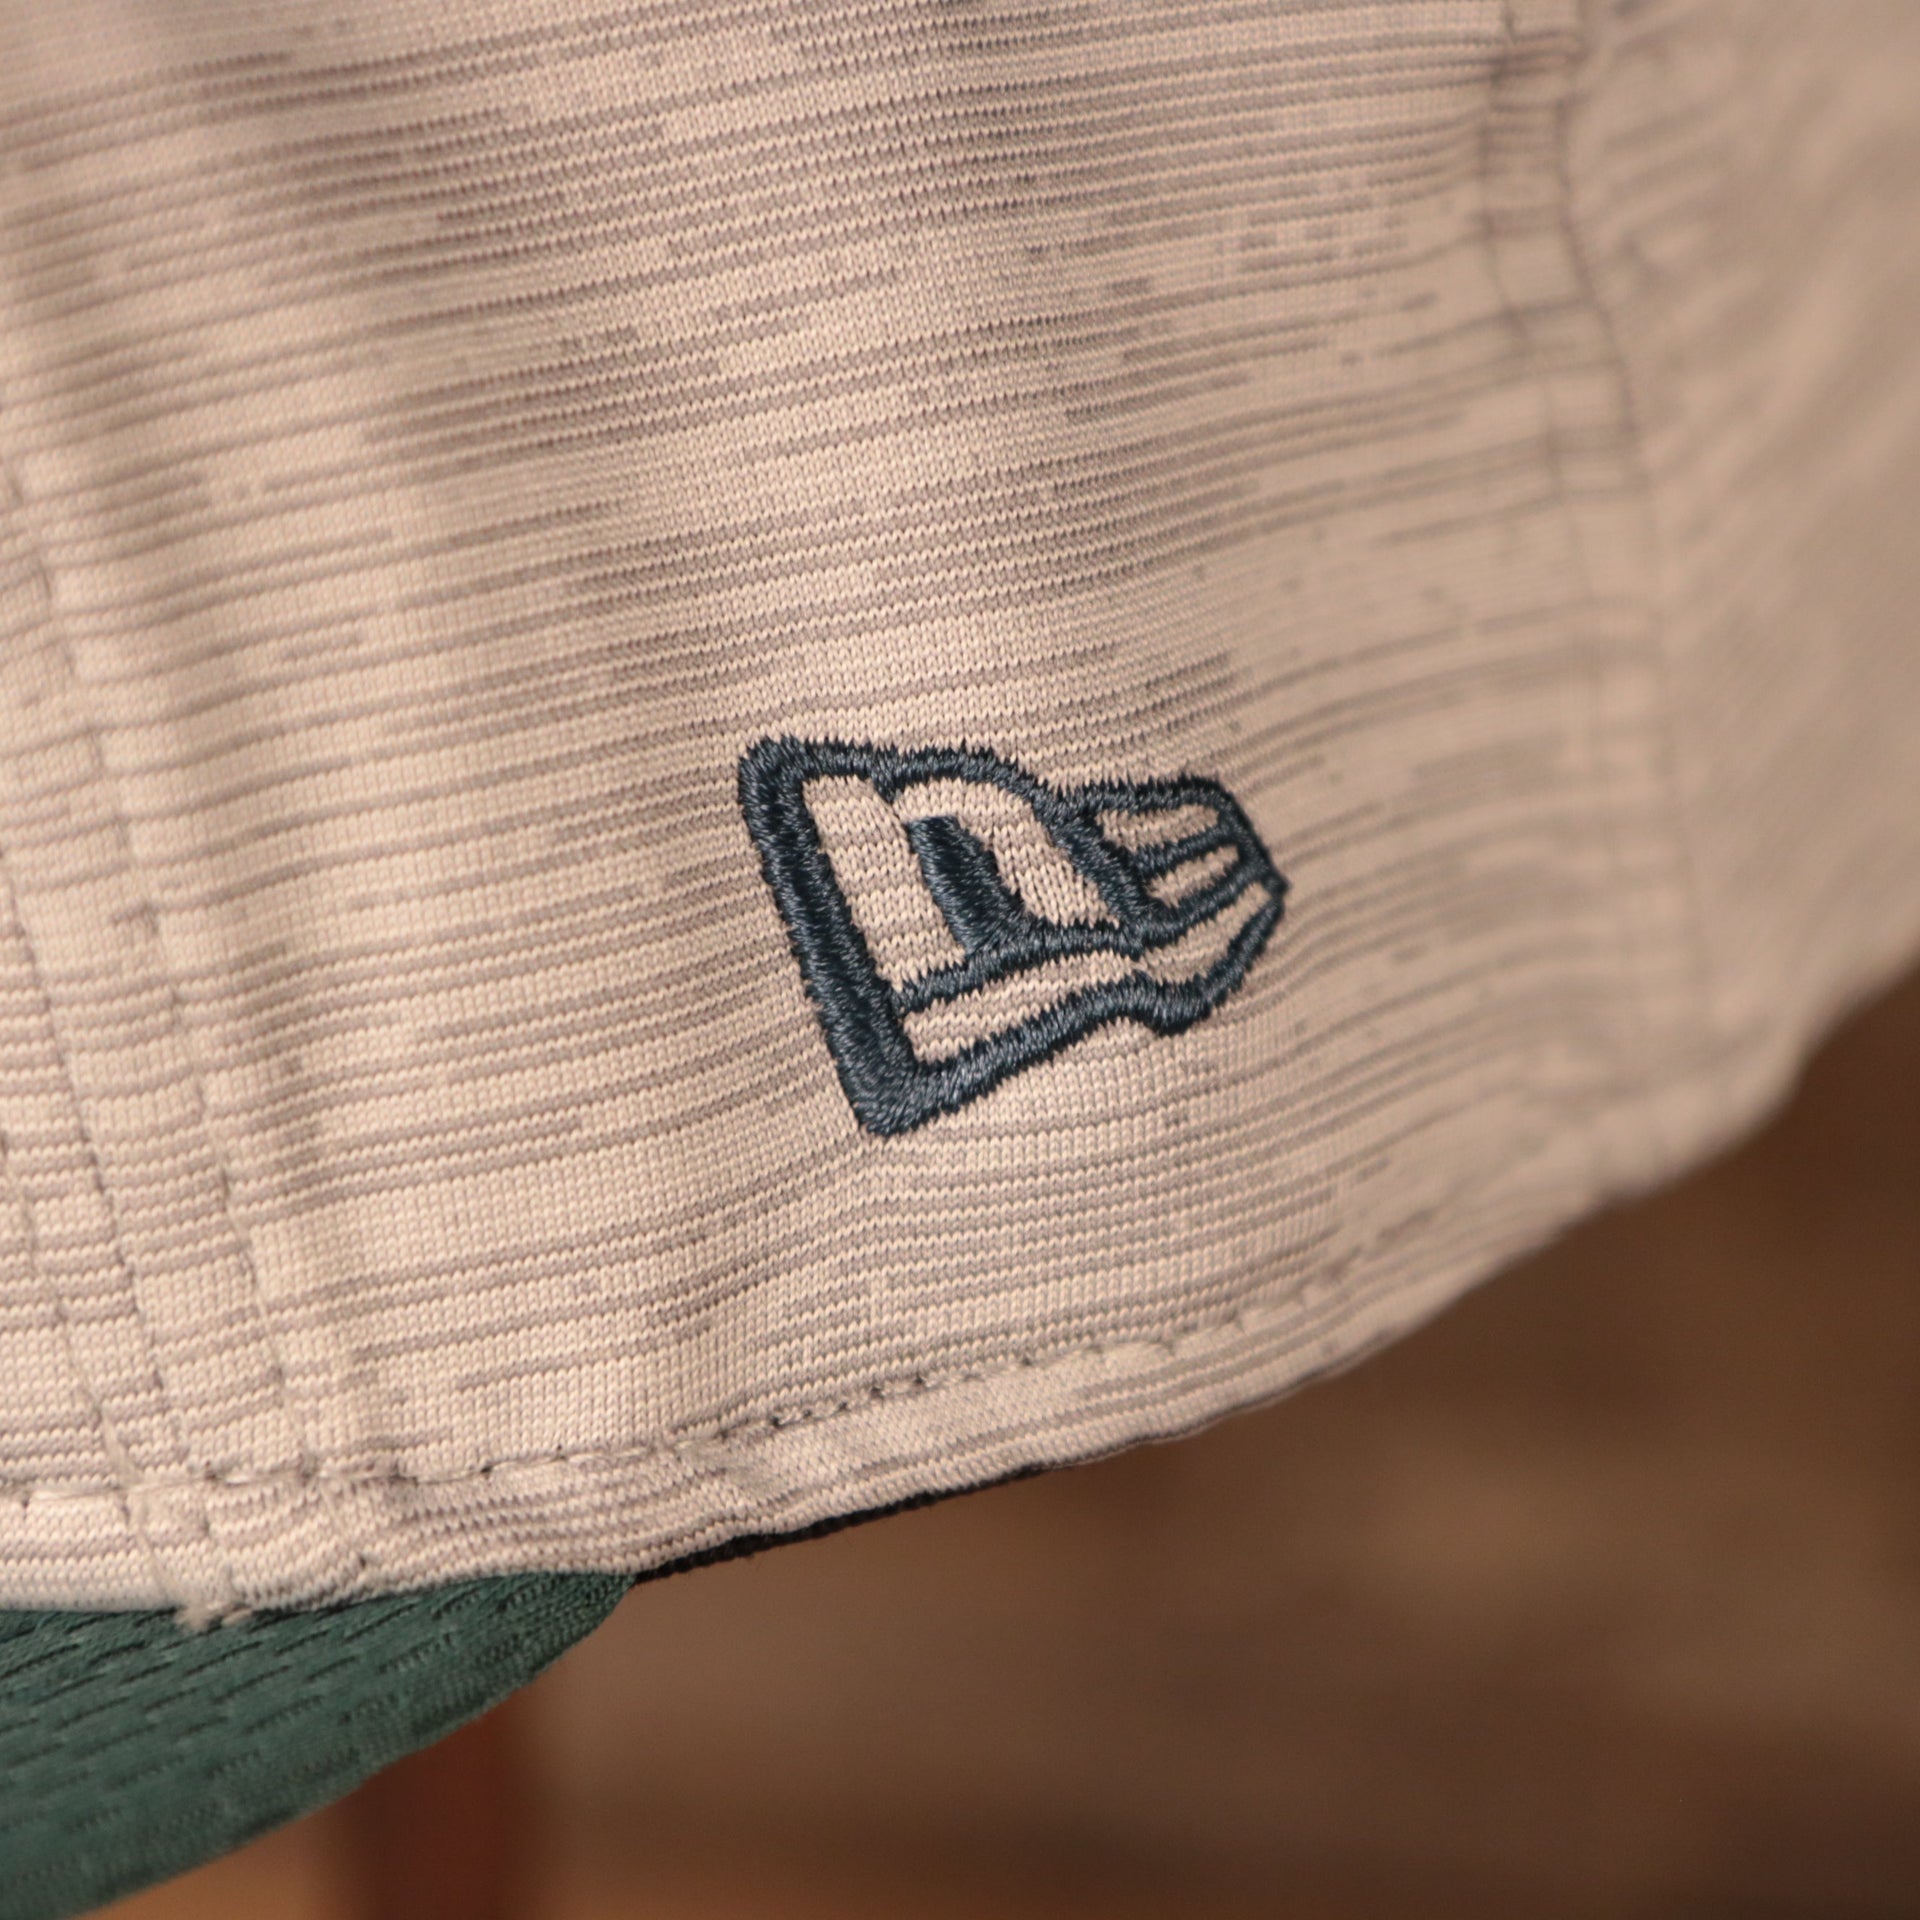 A closeup shot of the New Era patch on the side of the 2021 nfl on field snapback hat.